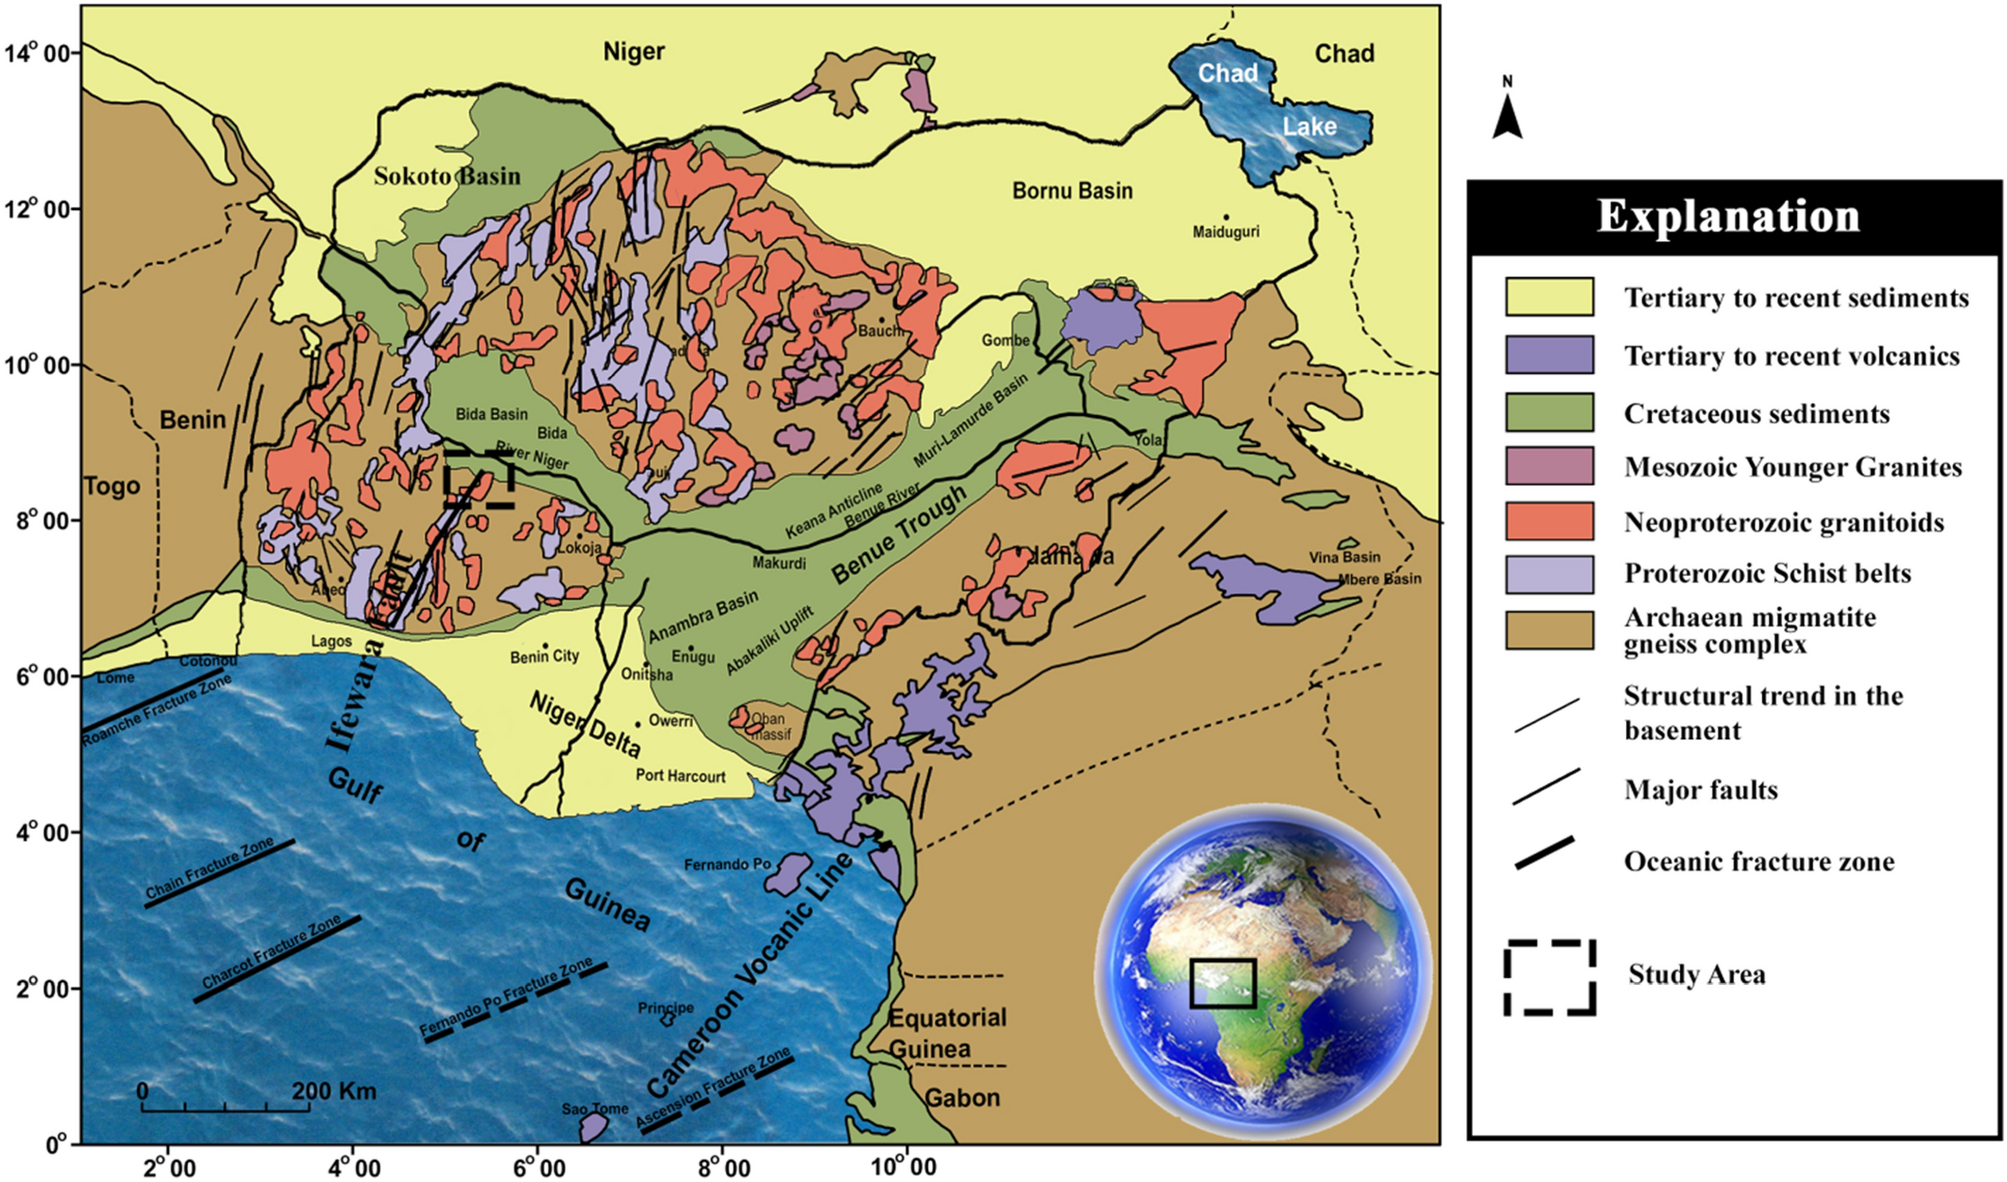 a Geologic map of the environs of the gold deposits and